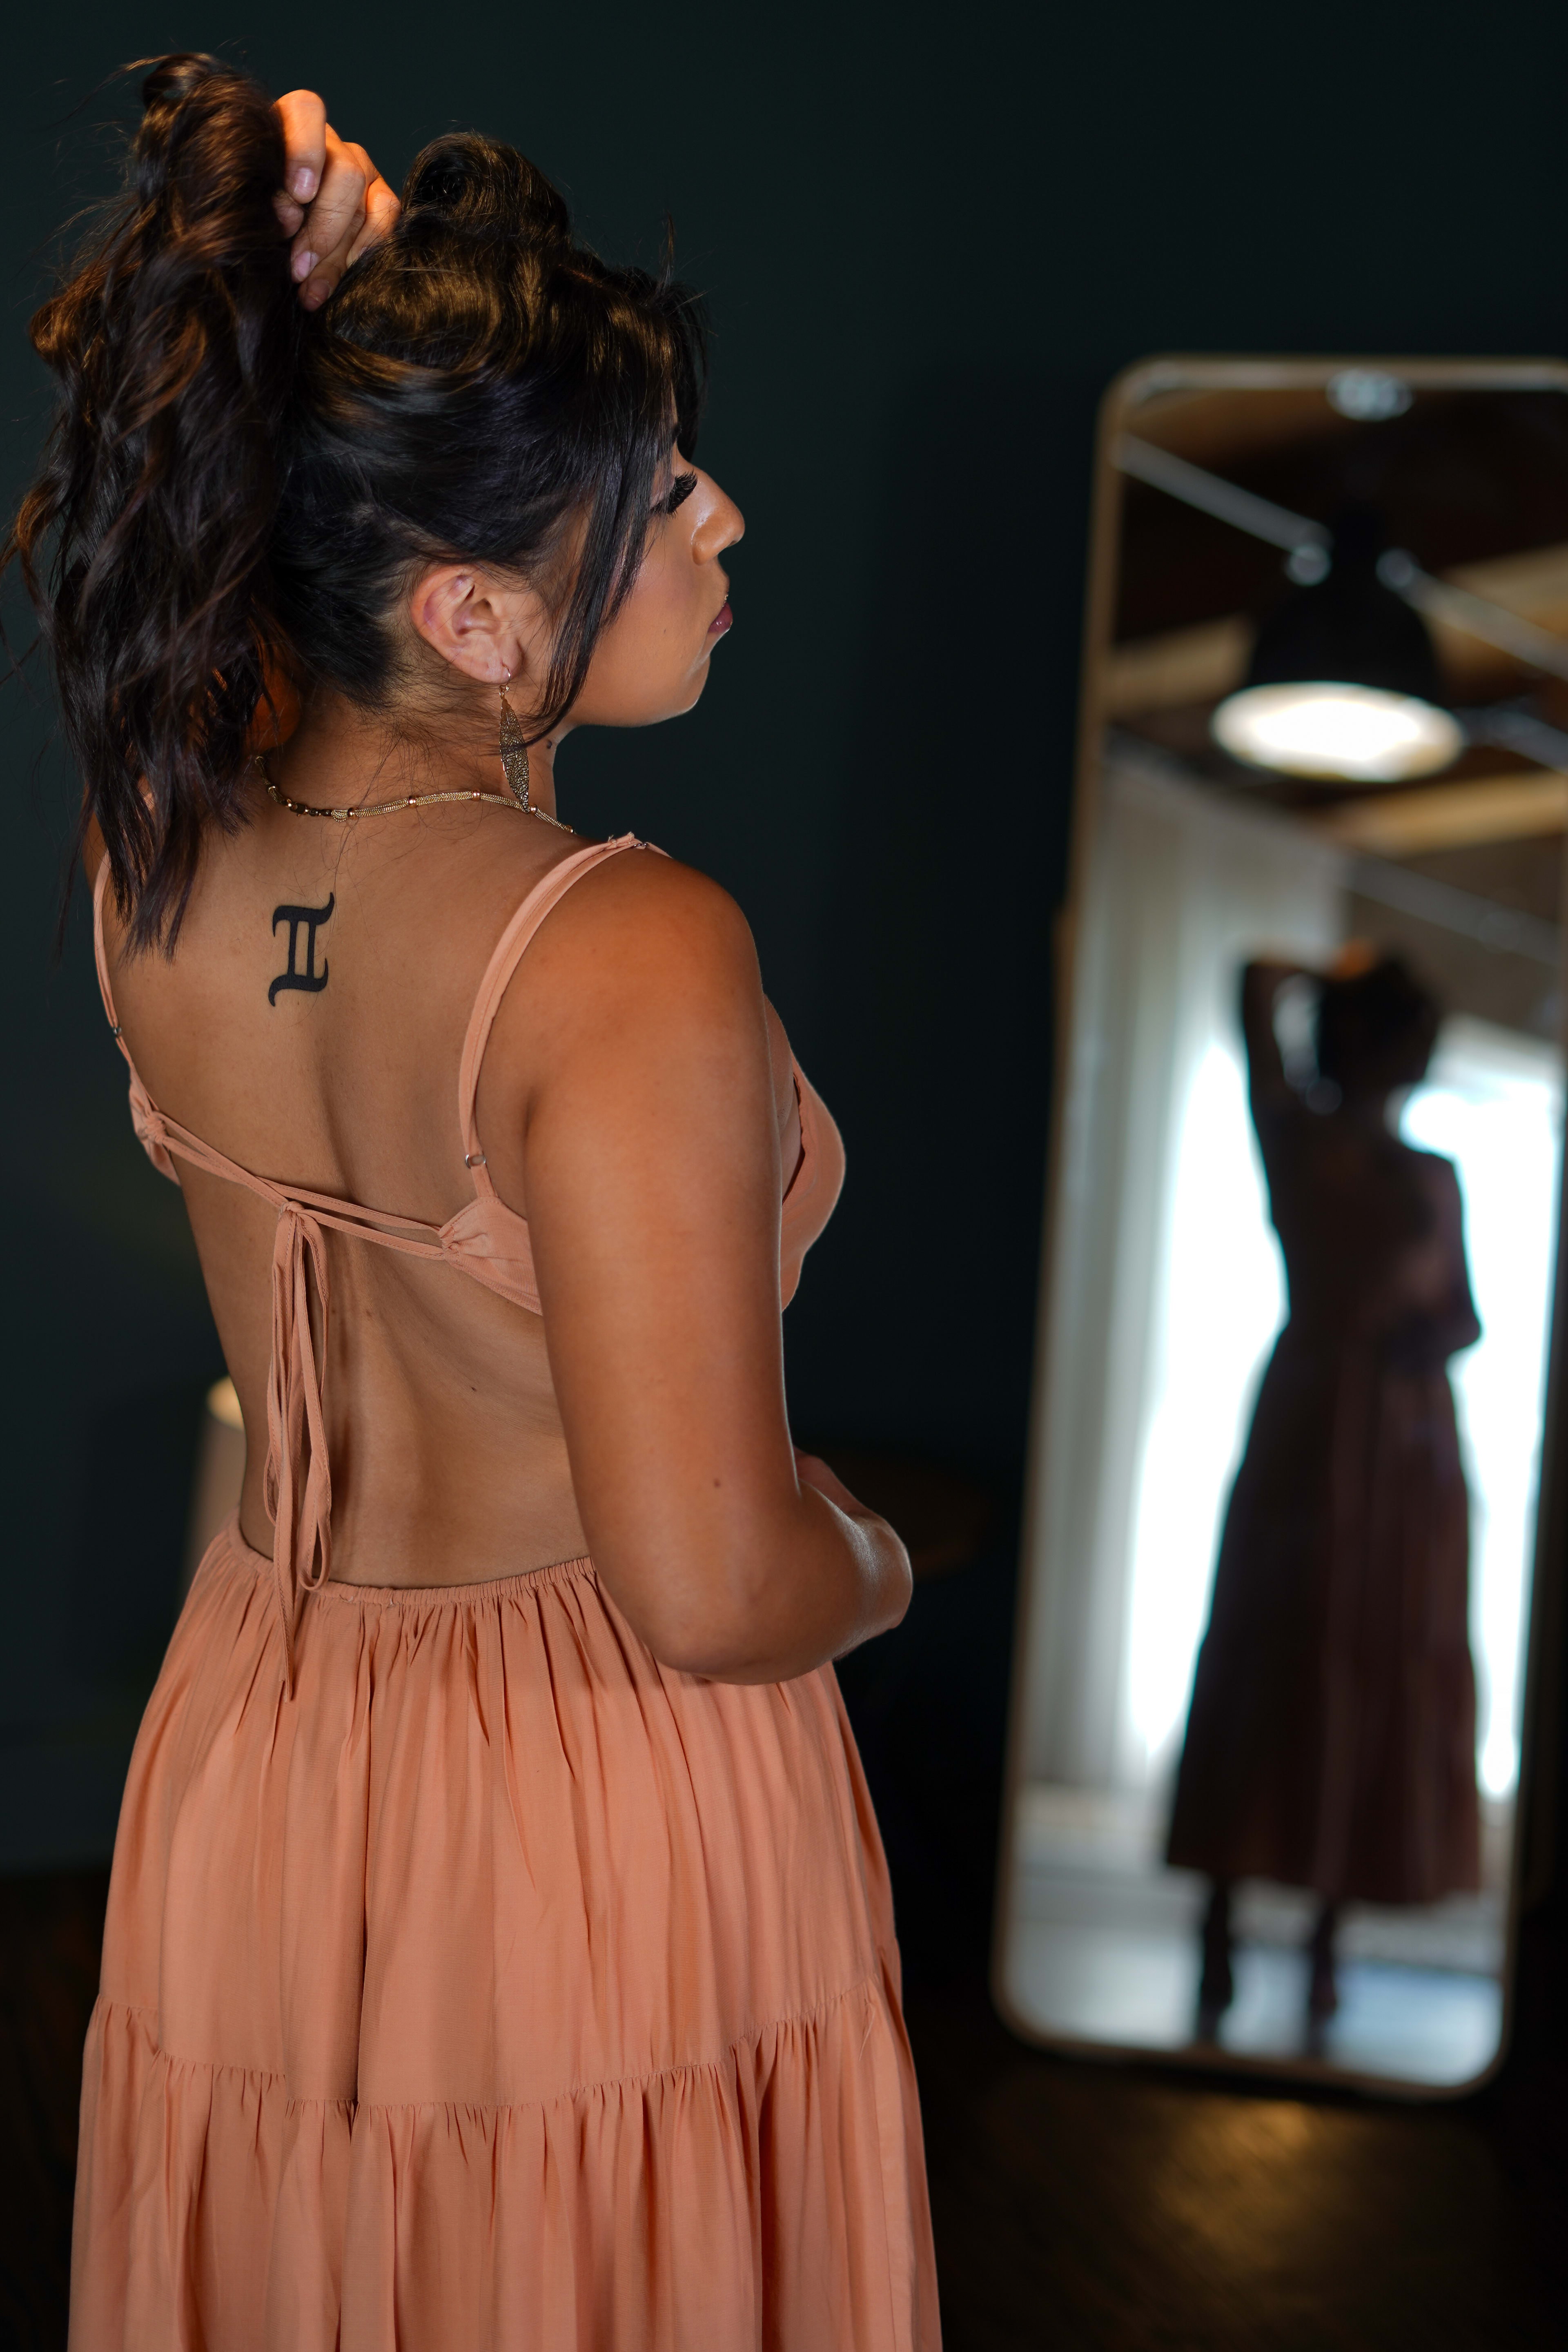 A woman with a tattoo on her back in an orange dress for a fashion photo shoot.